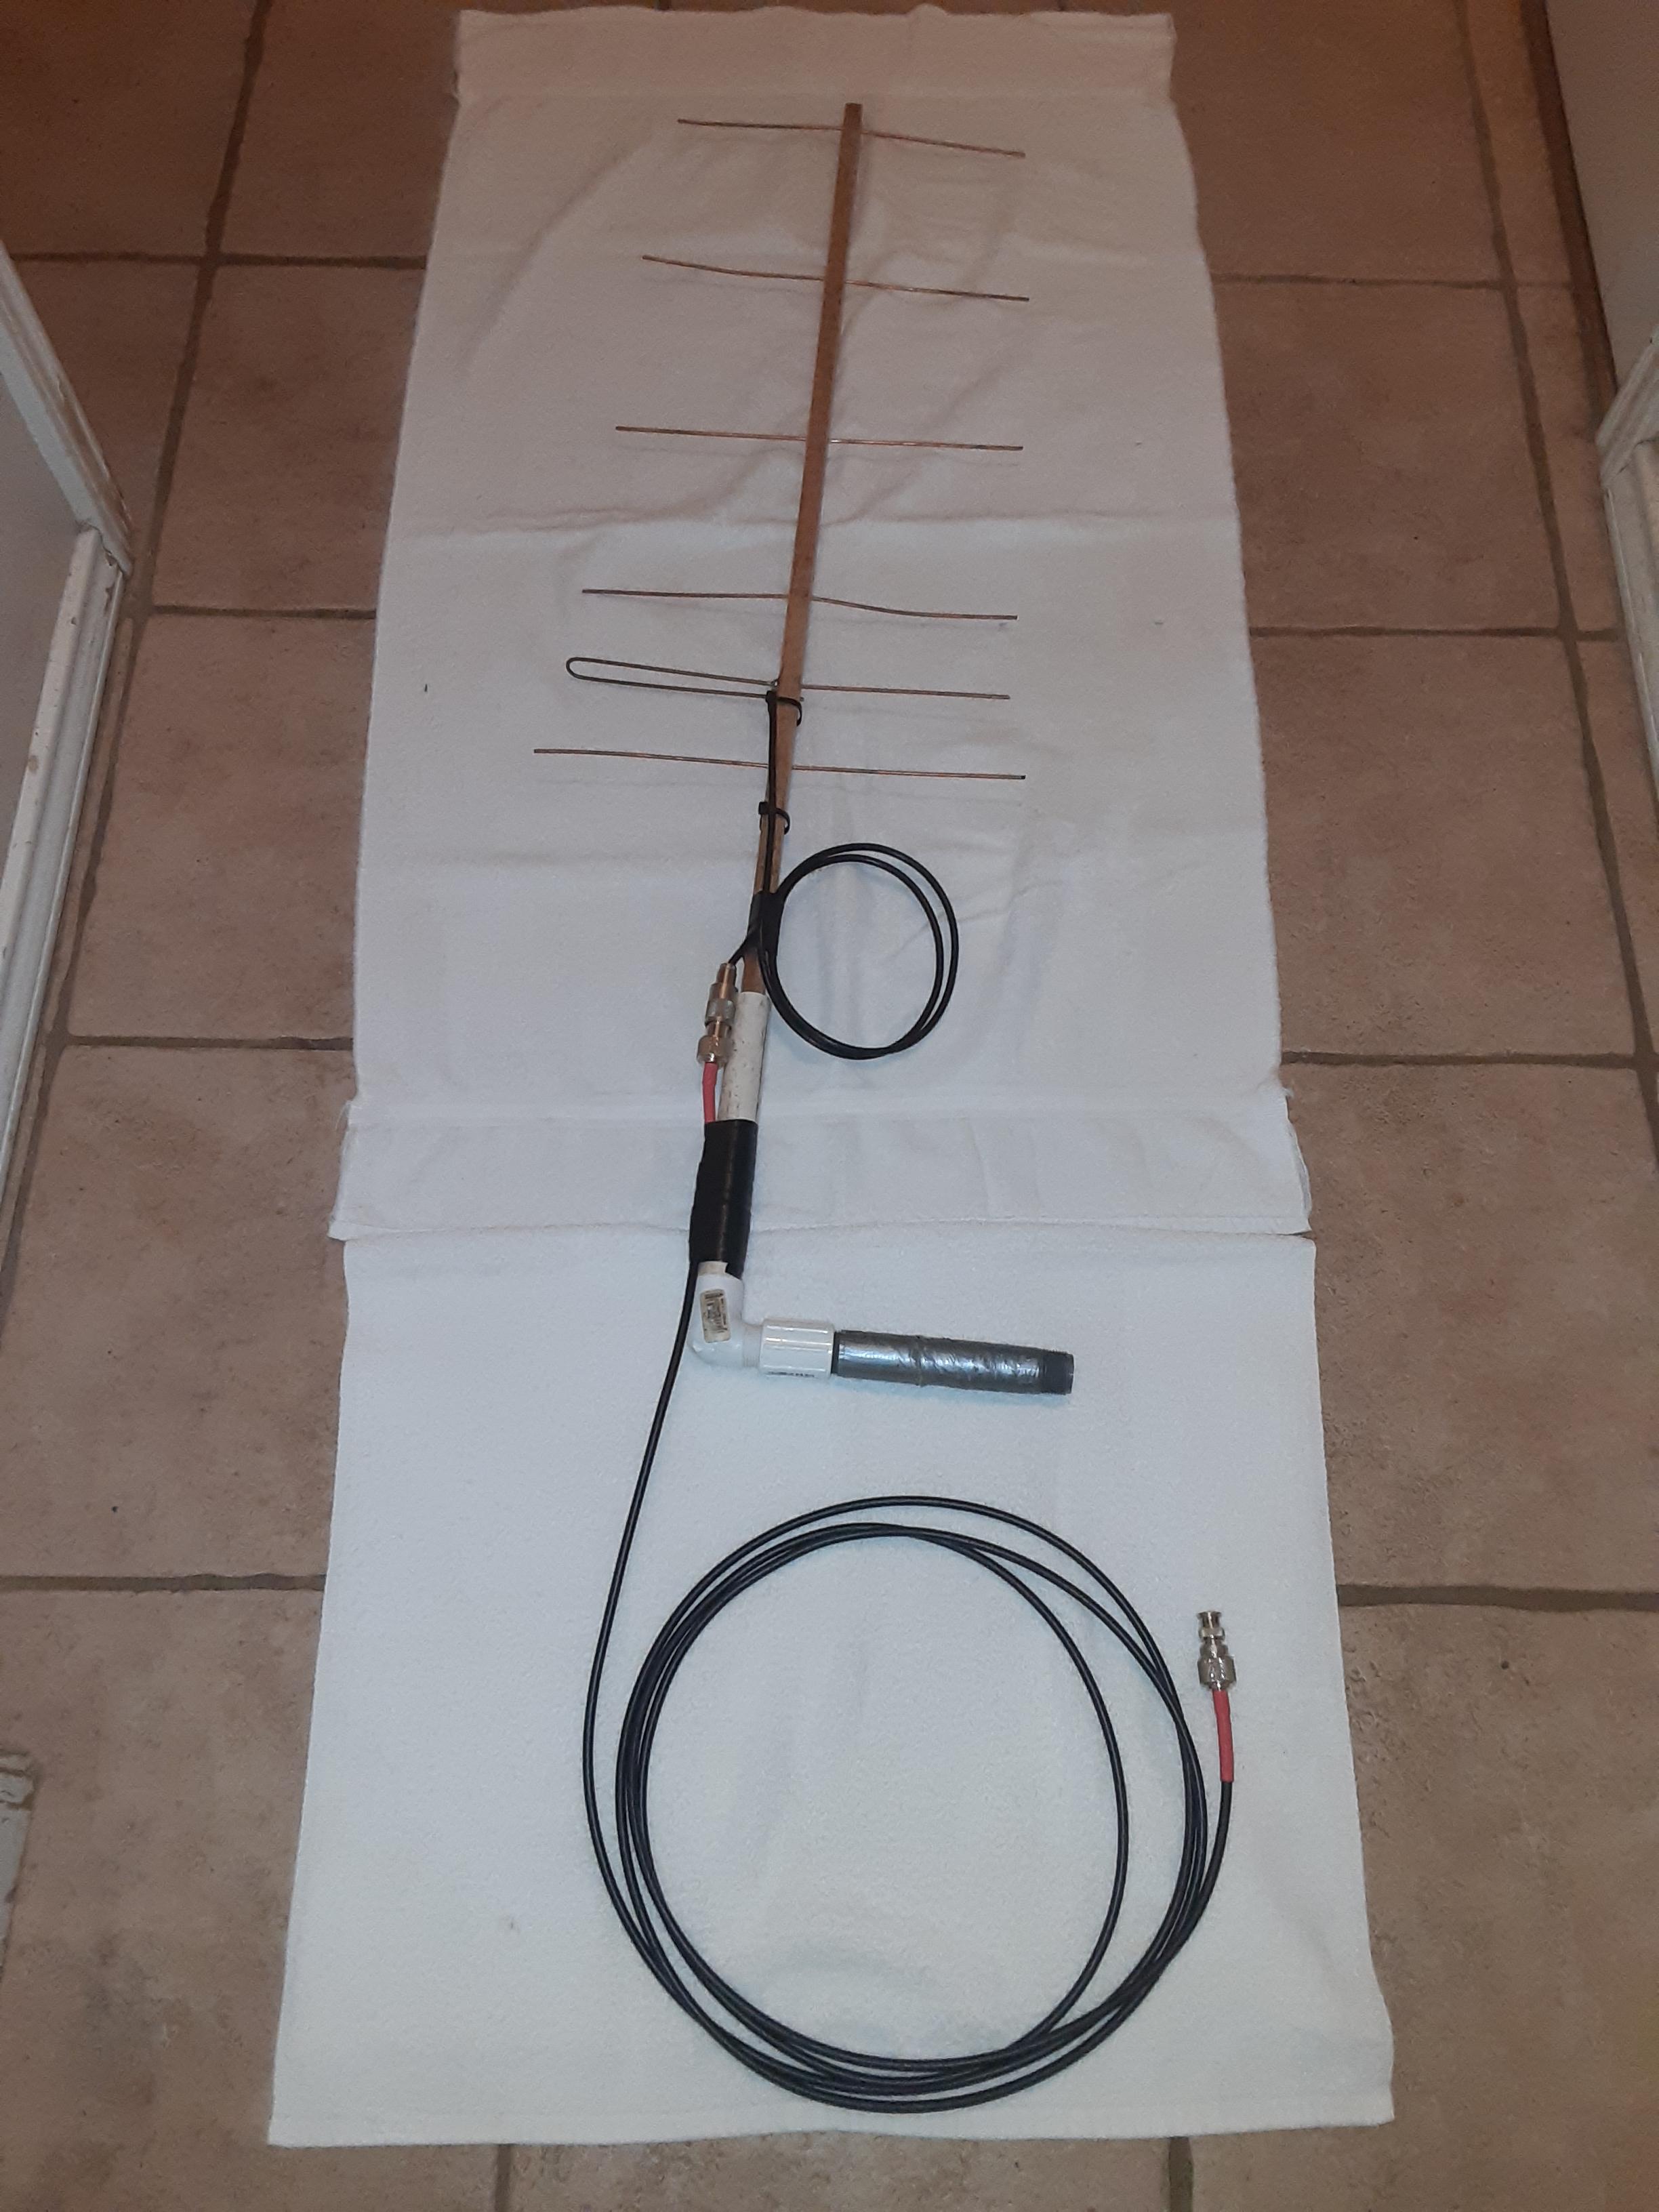 antenna PVC handle and cables